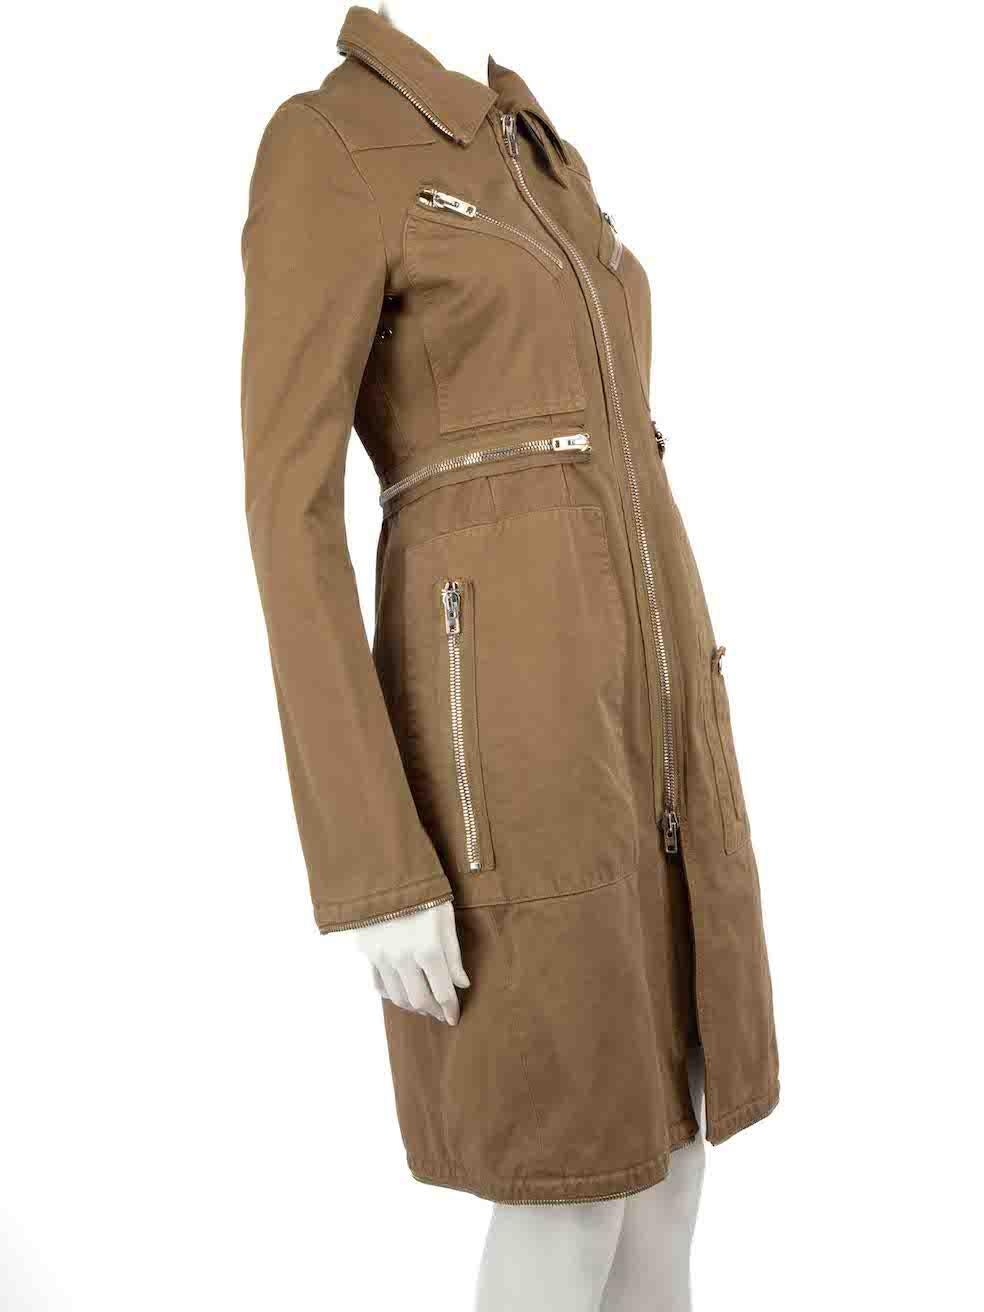 CONDITION is Very good. Minimal wear to coat is evident. Minimal wear to the front zip fastening end with light fraying on this used Givenchy designer resale item.
 
 Details
 Khaki
 Cotton
 Mid length coat
 Front double zip closure
 Zip detail